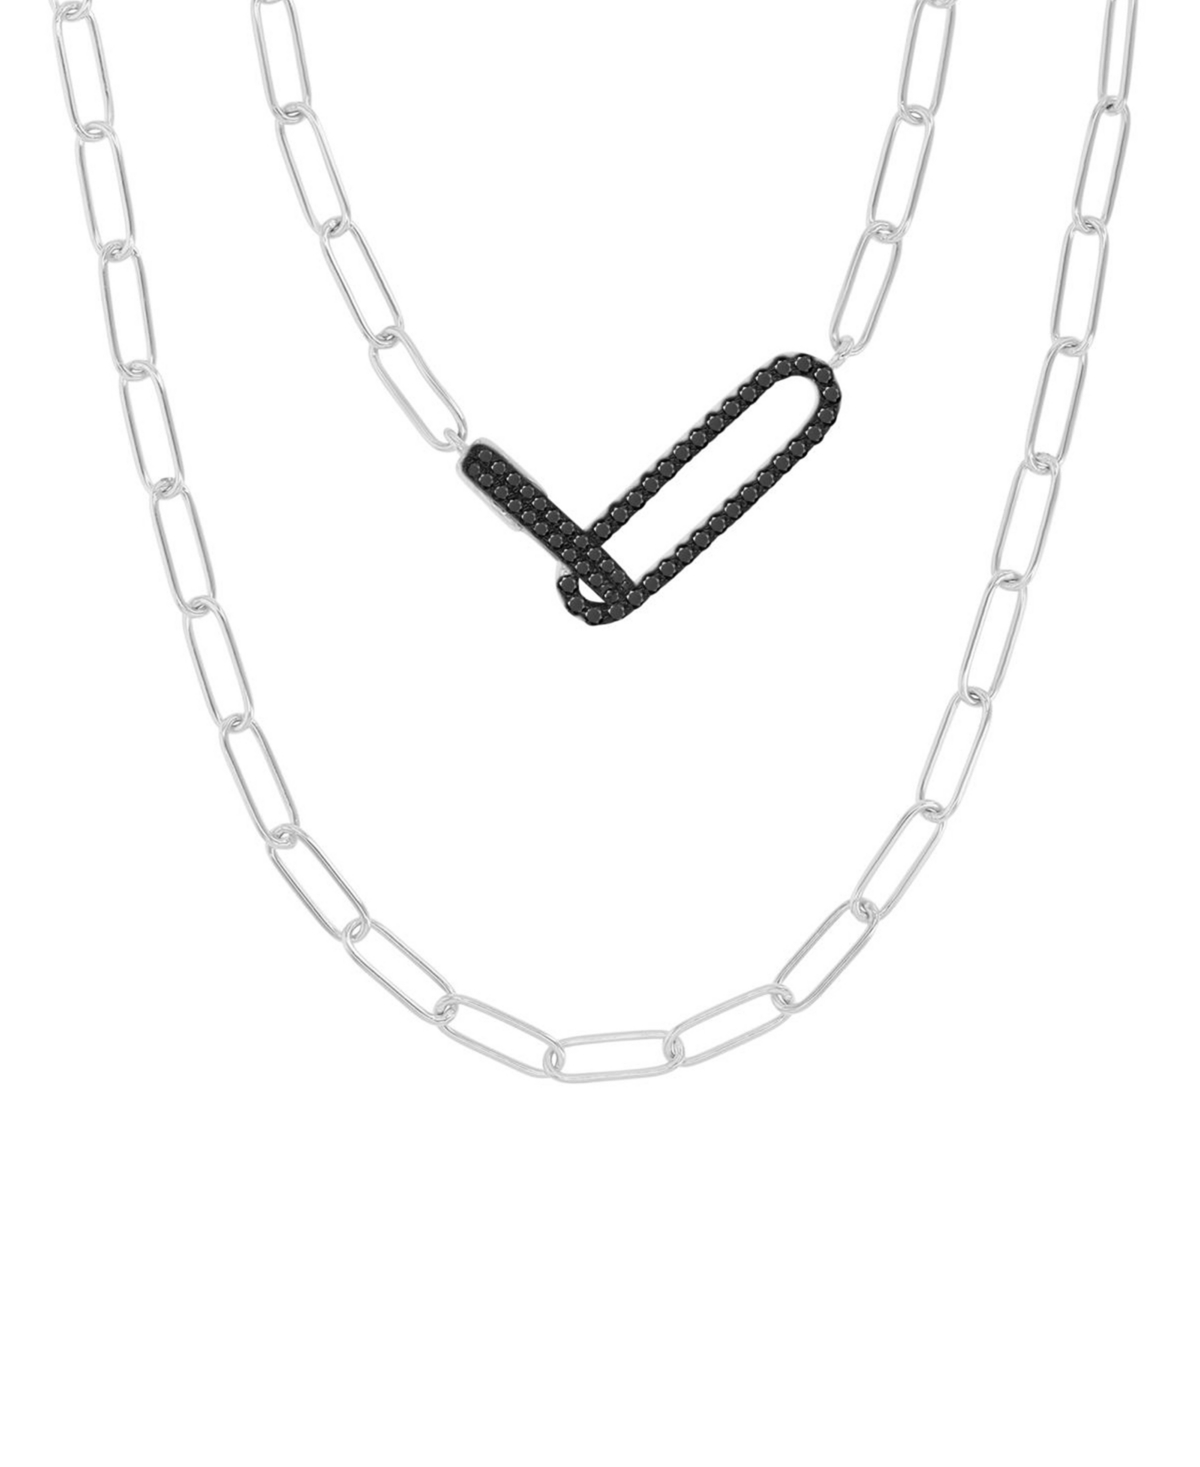 Black Spinel Pave Interlocking Paperclip Link 19" Statement Necklace (1/2 ct. t.w.) in Sterling Silver - Black Spinel